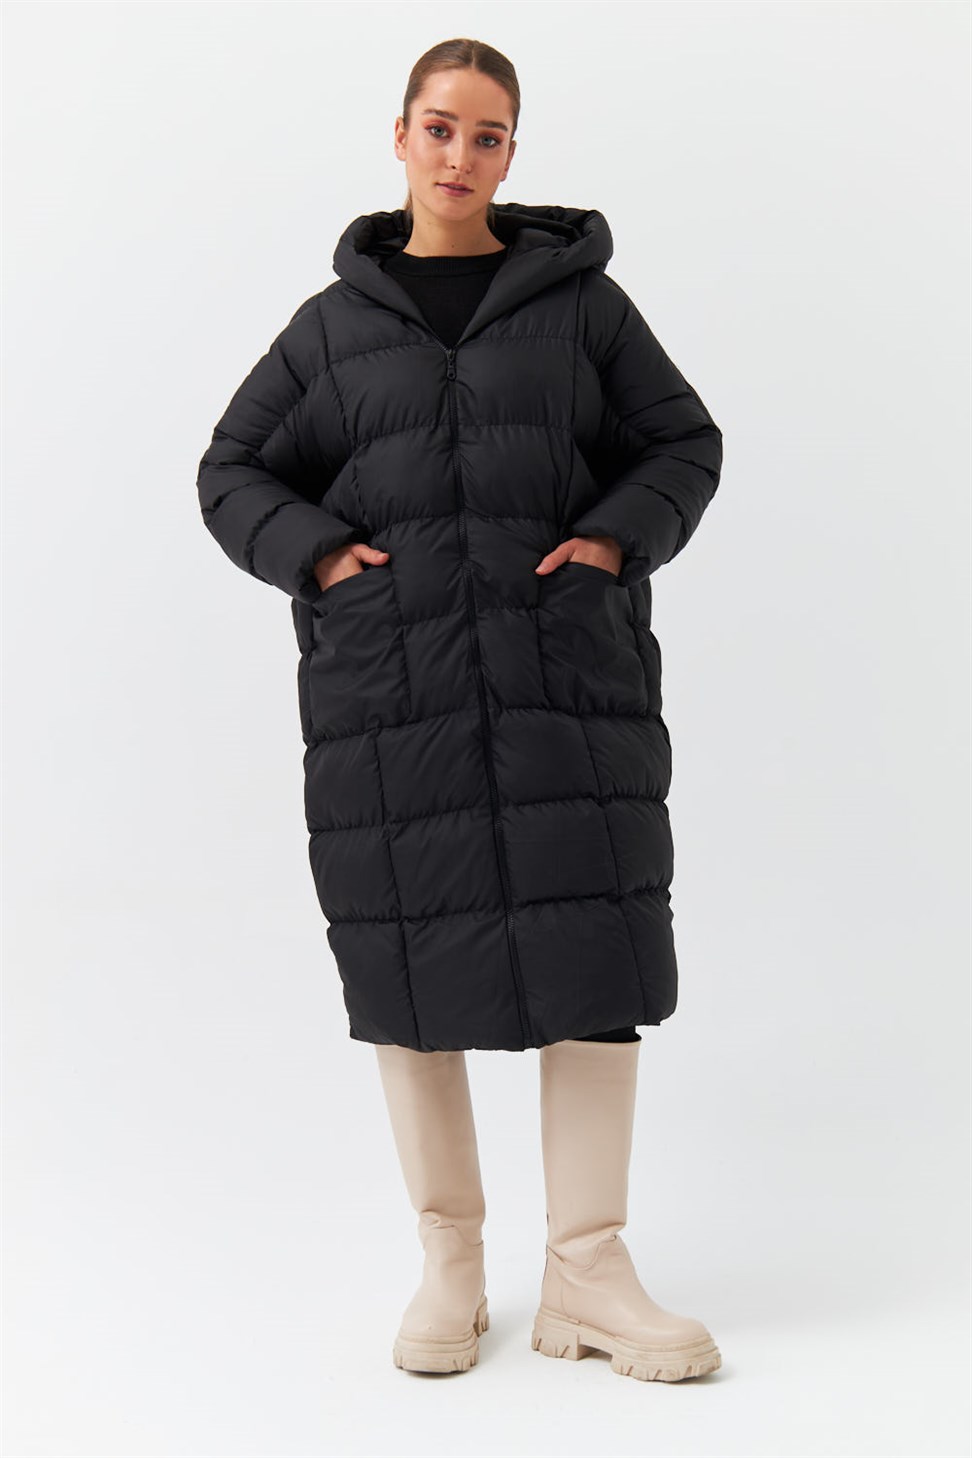 Modest Hooded Inflatable Black Womens Coats